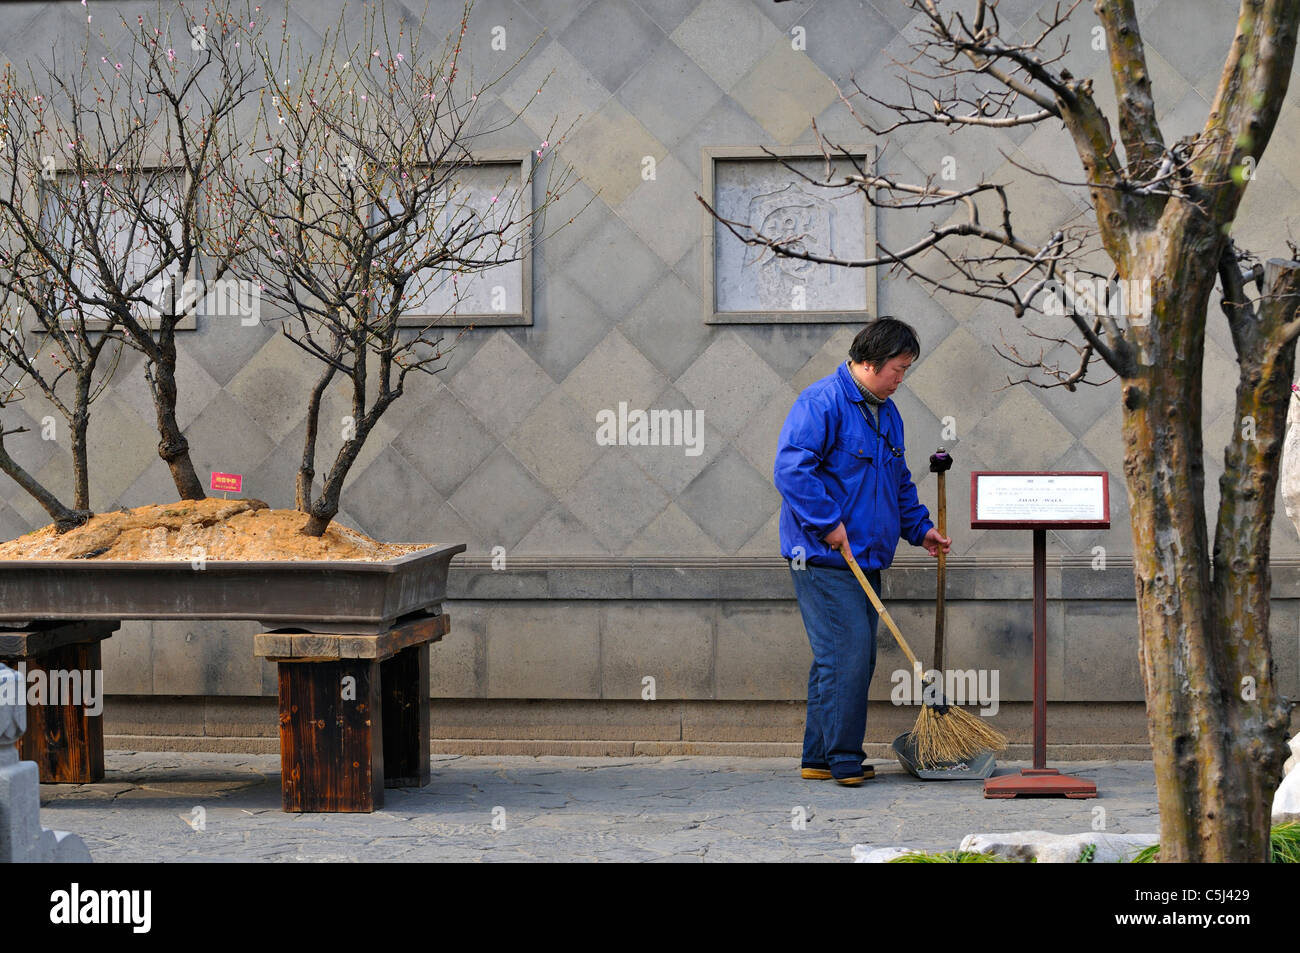 An blue-uniformed attendant tidies up a paved area with shrubs and trees, YuYuan Gardens, Shanghai, China Stock Photo